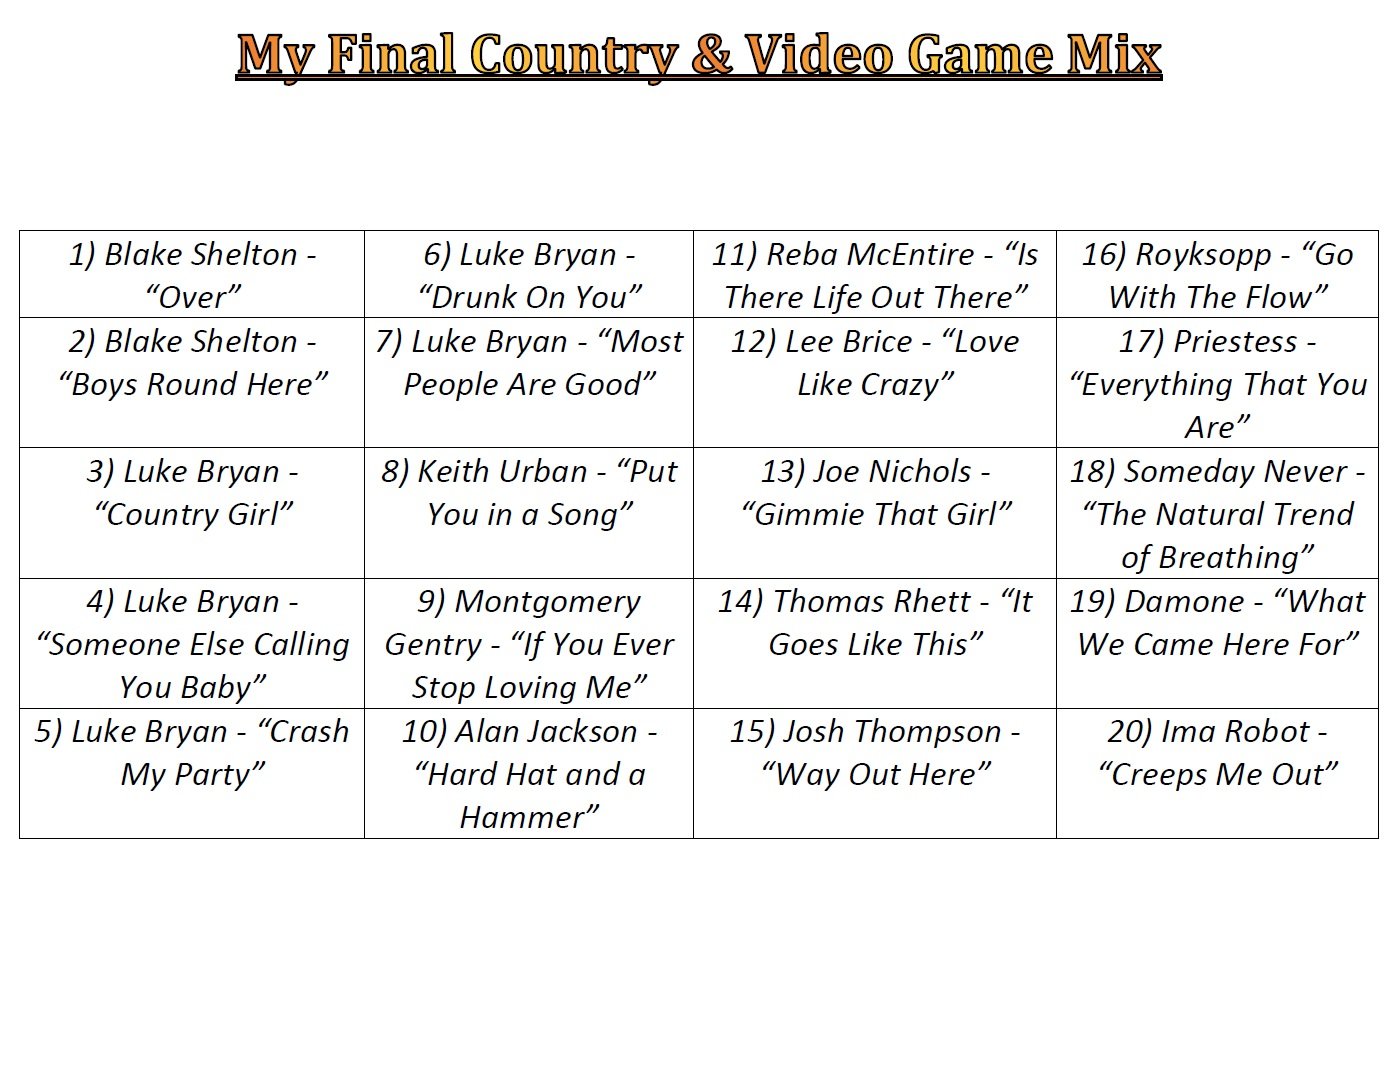 My Final Country & Video Game Mix.jpg